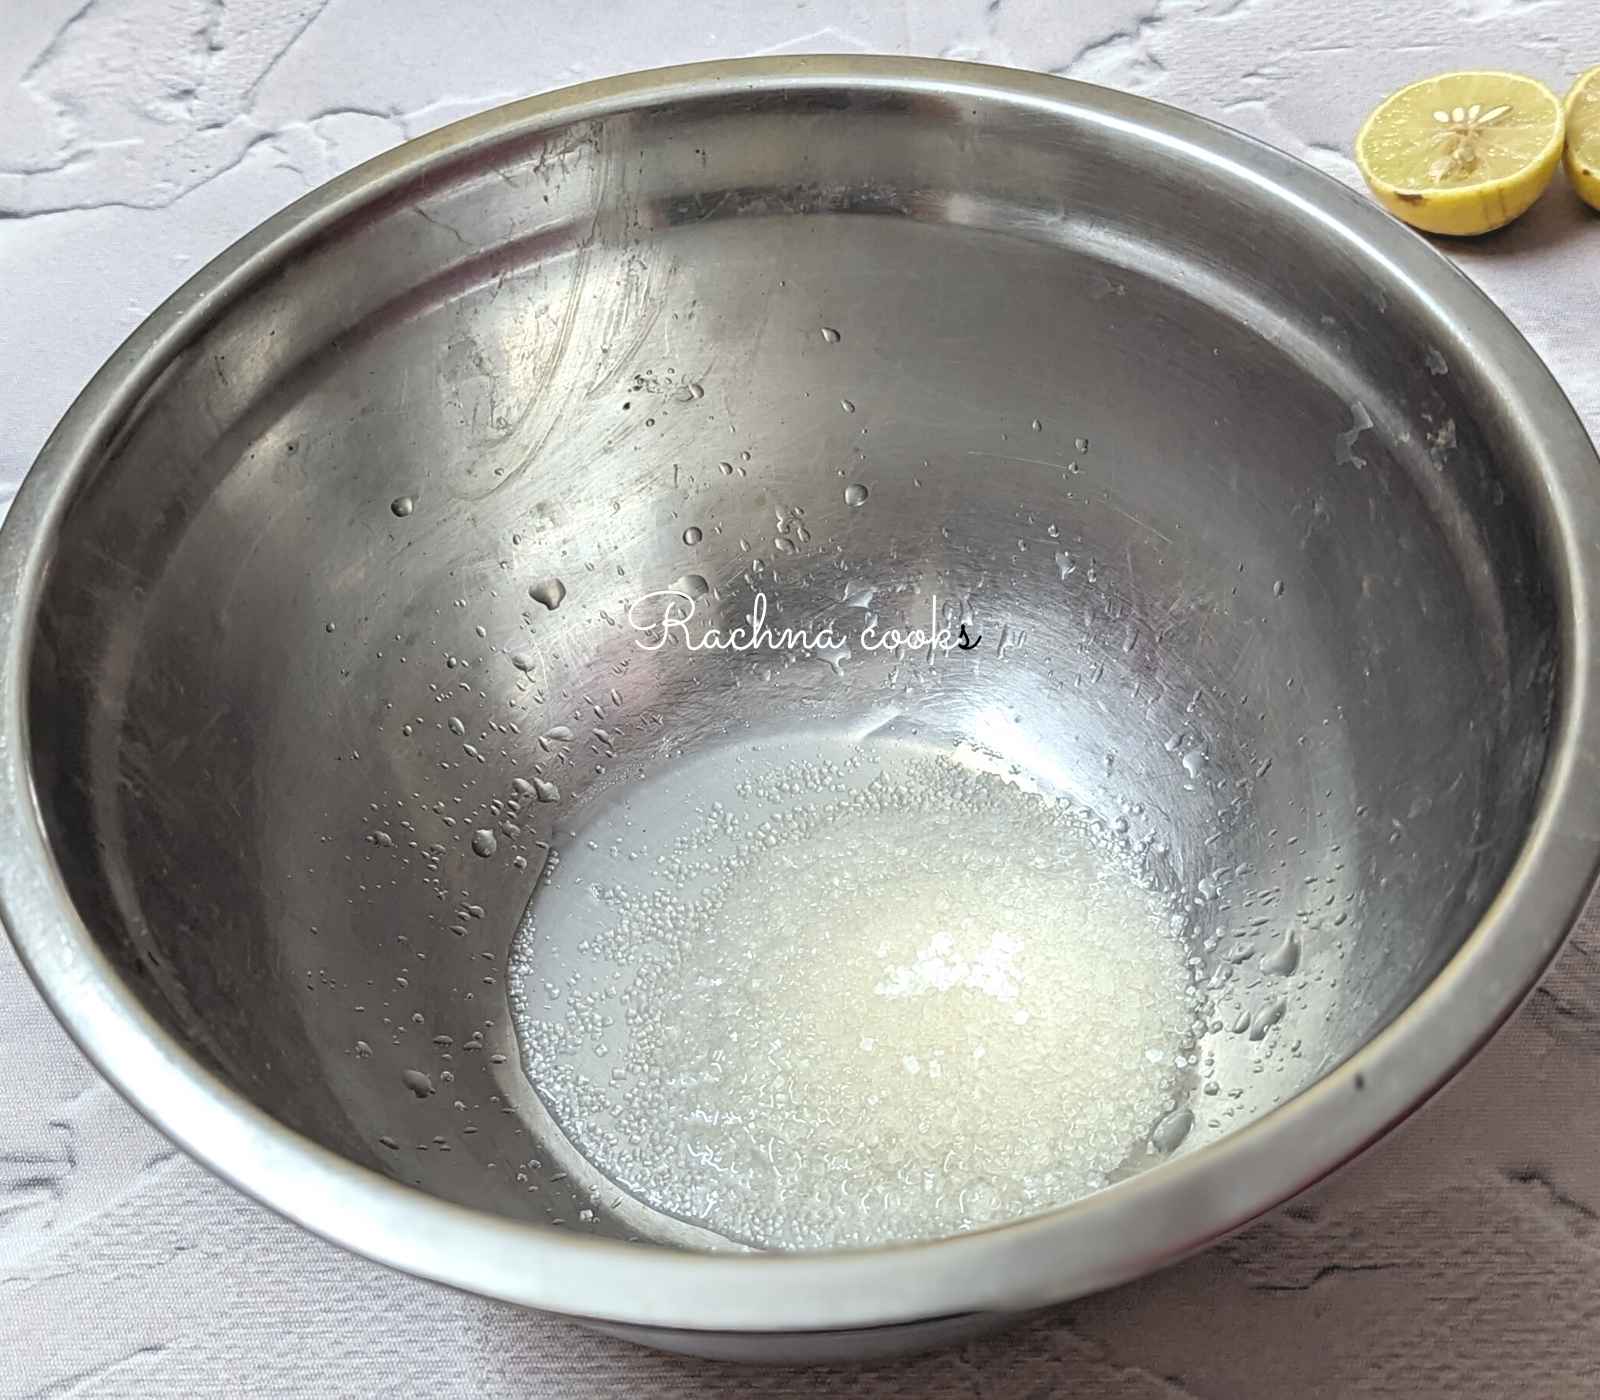 Lemon juice and sugar being mixed in a shallow bowl.